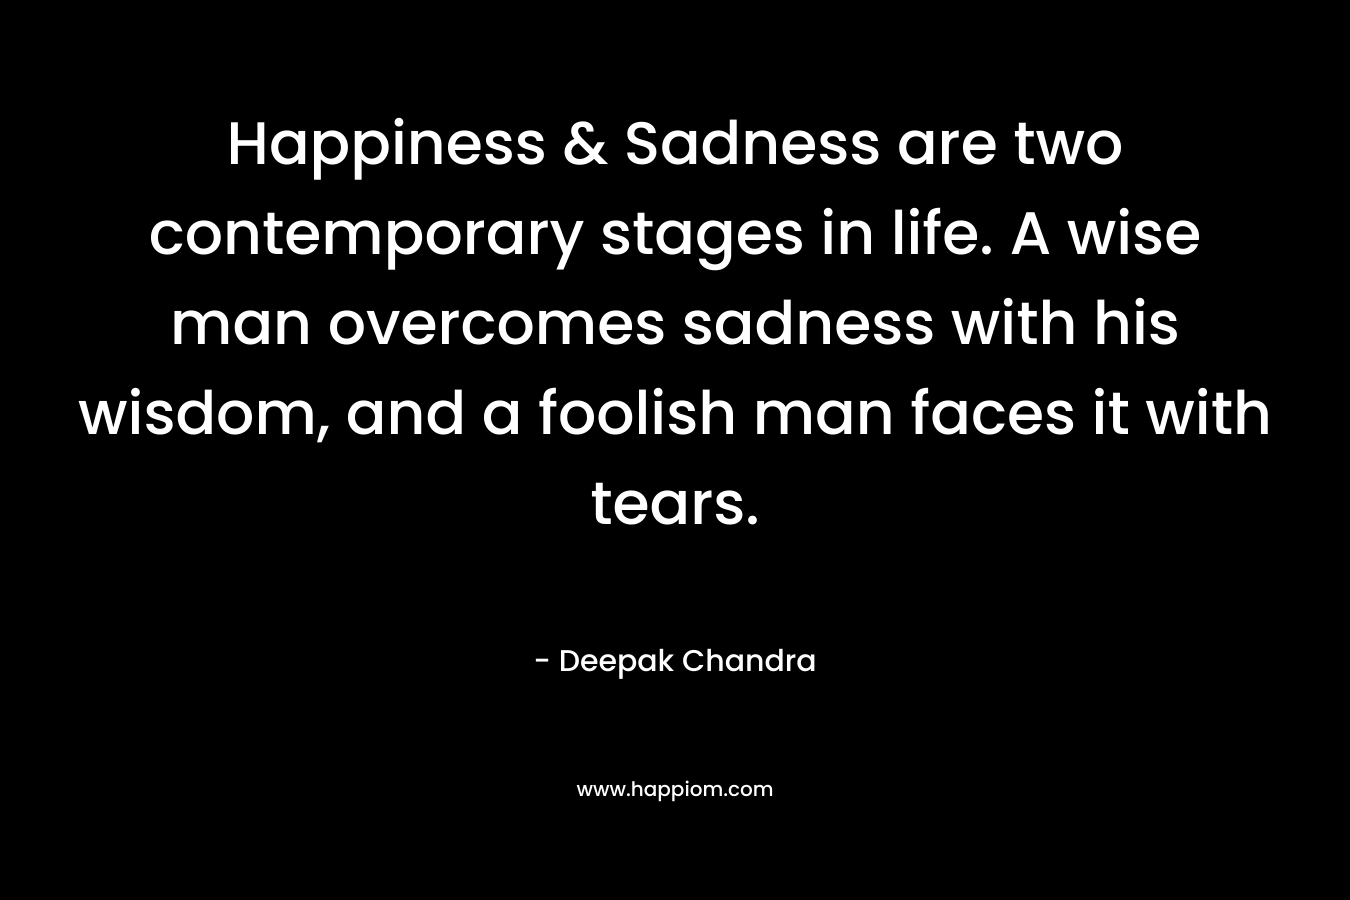 Happiness & Sadness are two contemporary stages in life. A wise man overcomes sadness with his wisdom, and a foolish man faces it with tears.